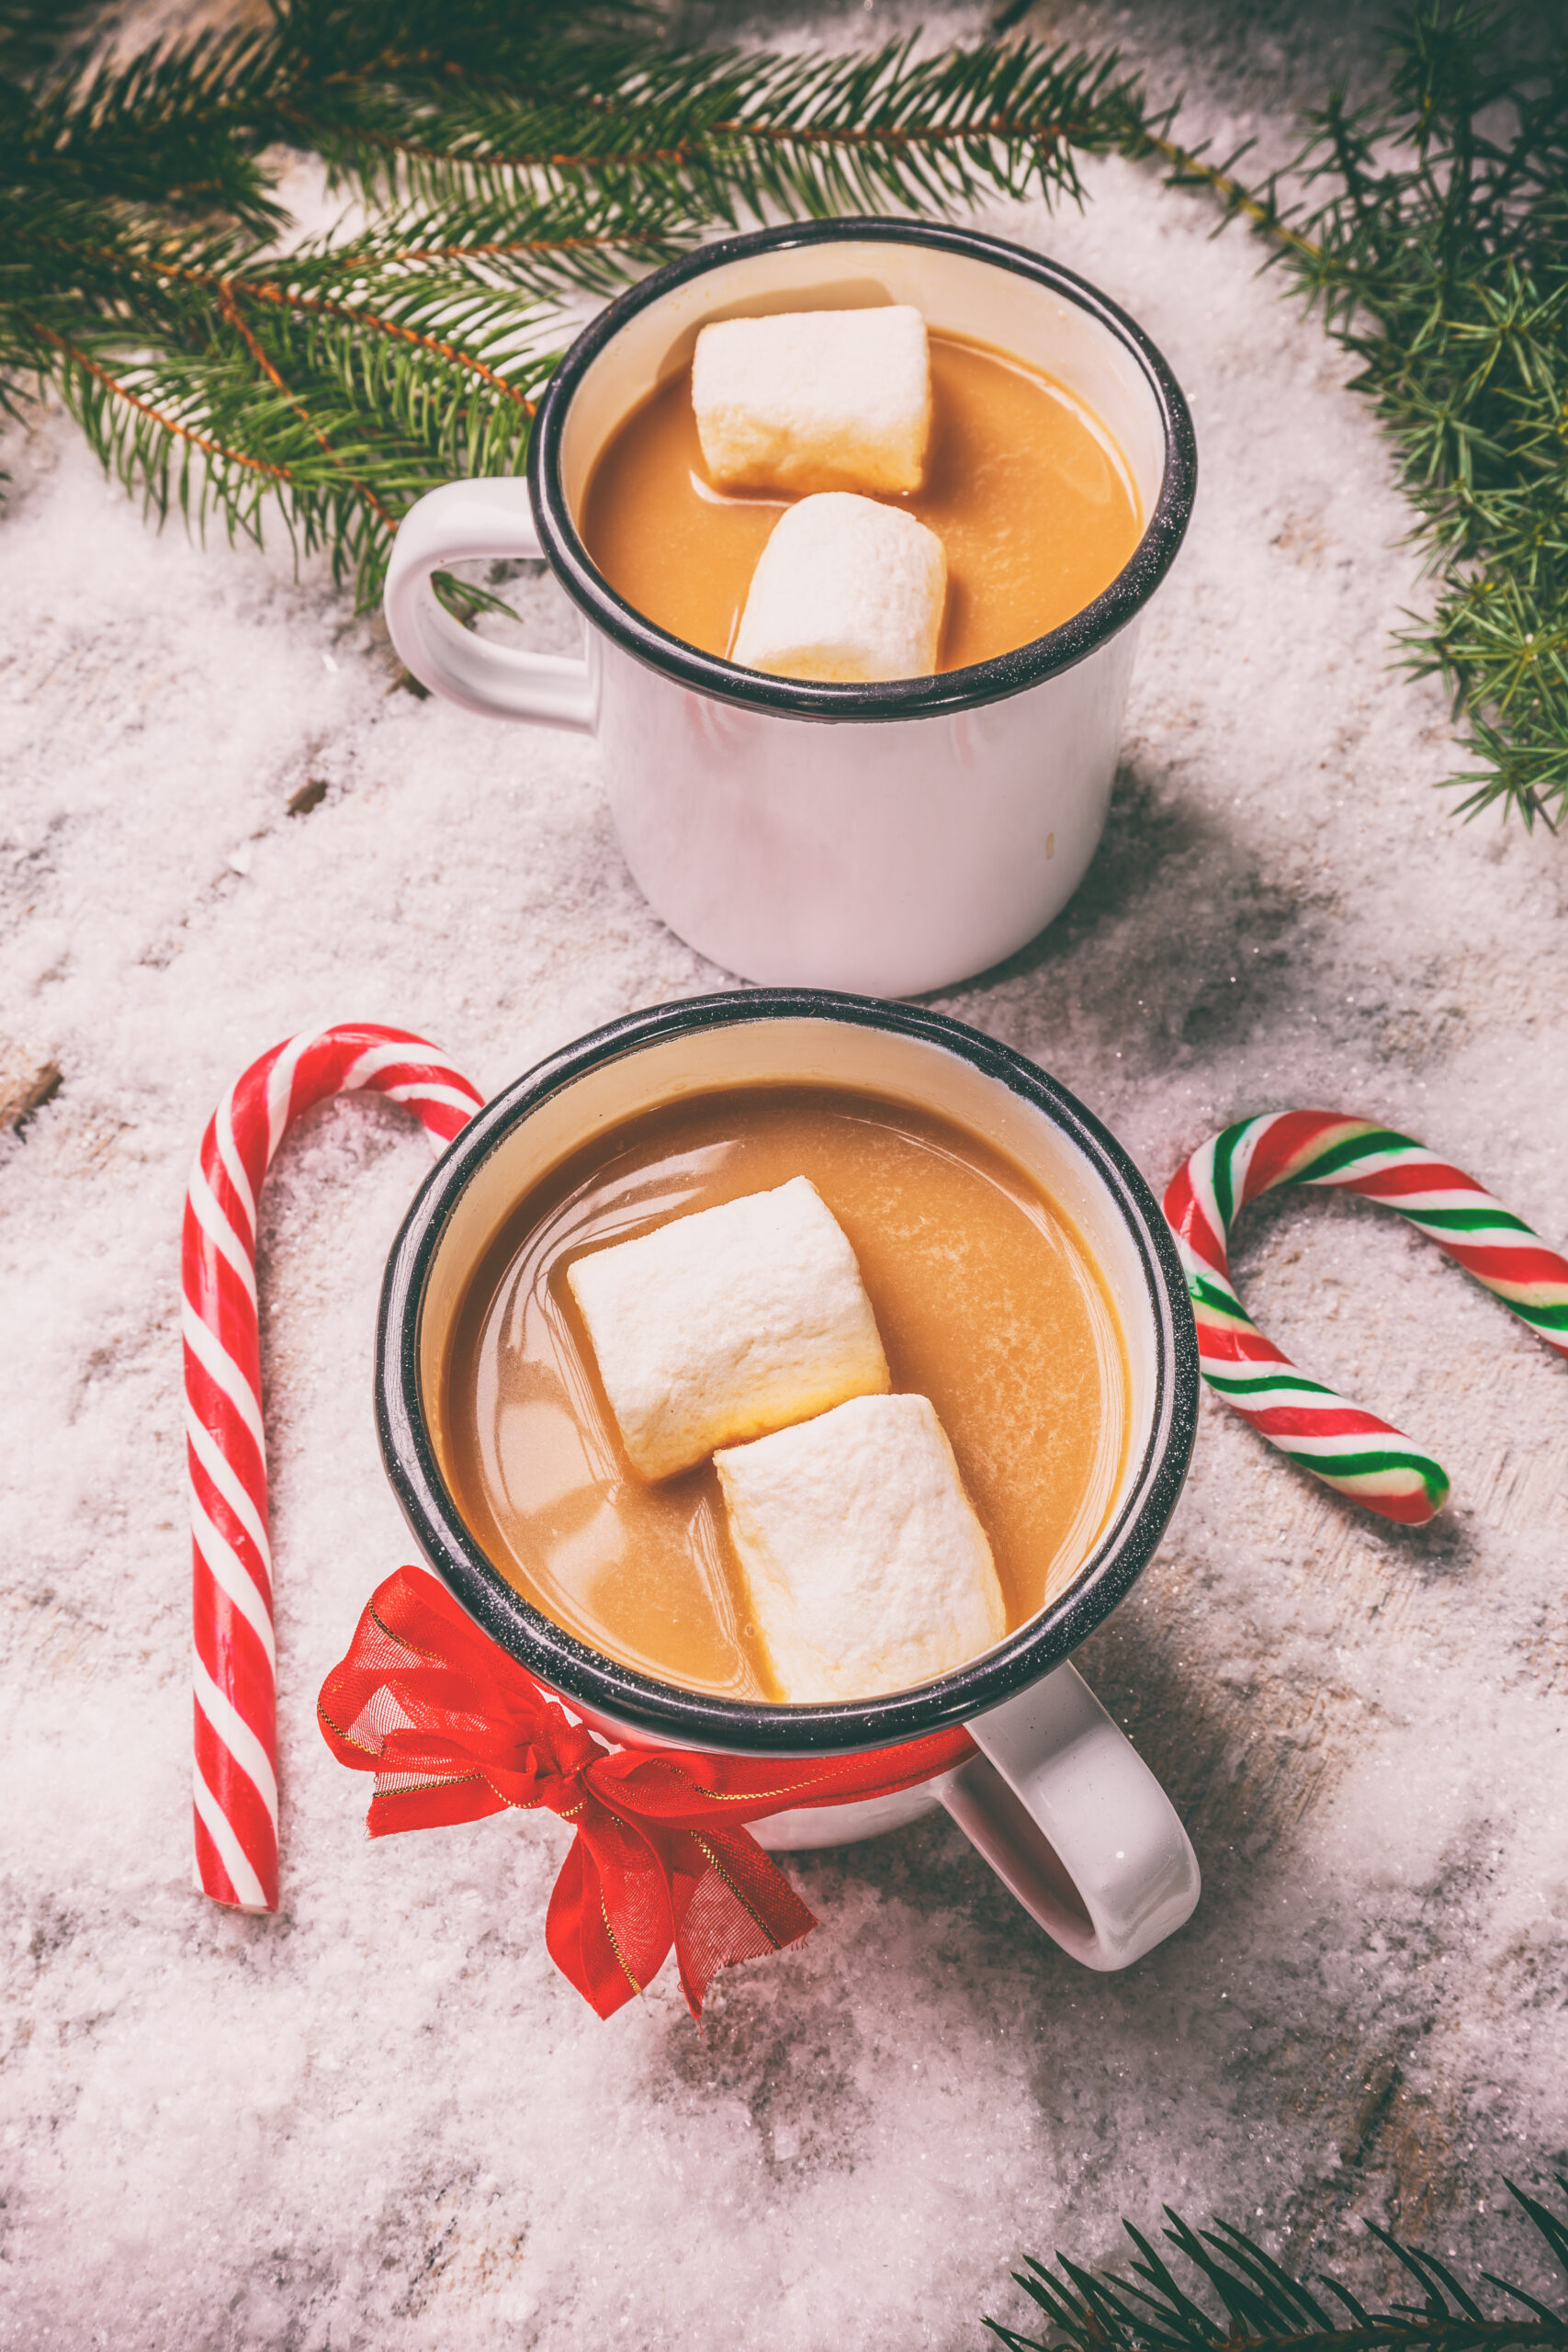 Two mugs of hot cocoa with large marshmallows sit on the snow surrounded by pine needles and candy canes.